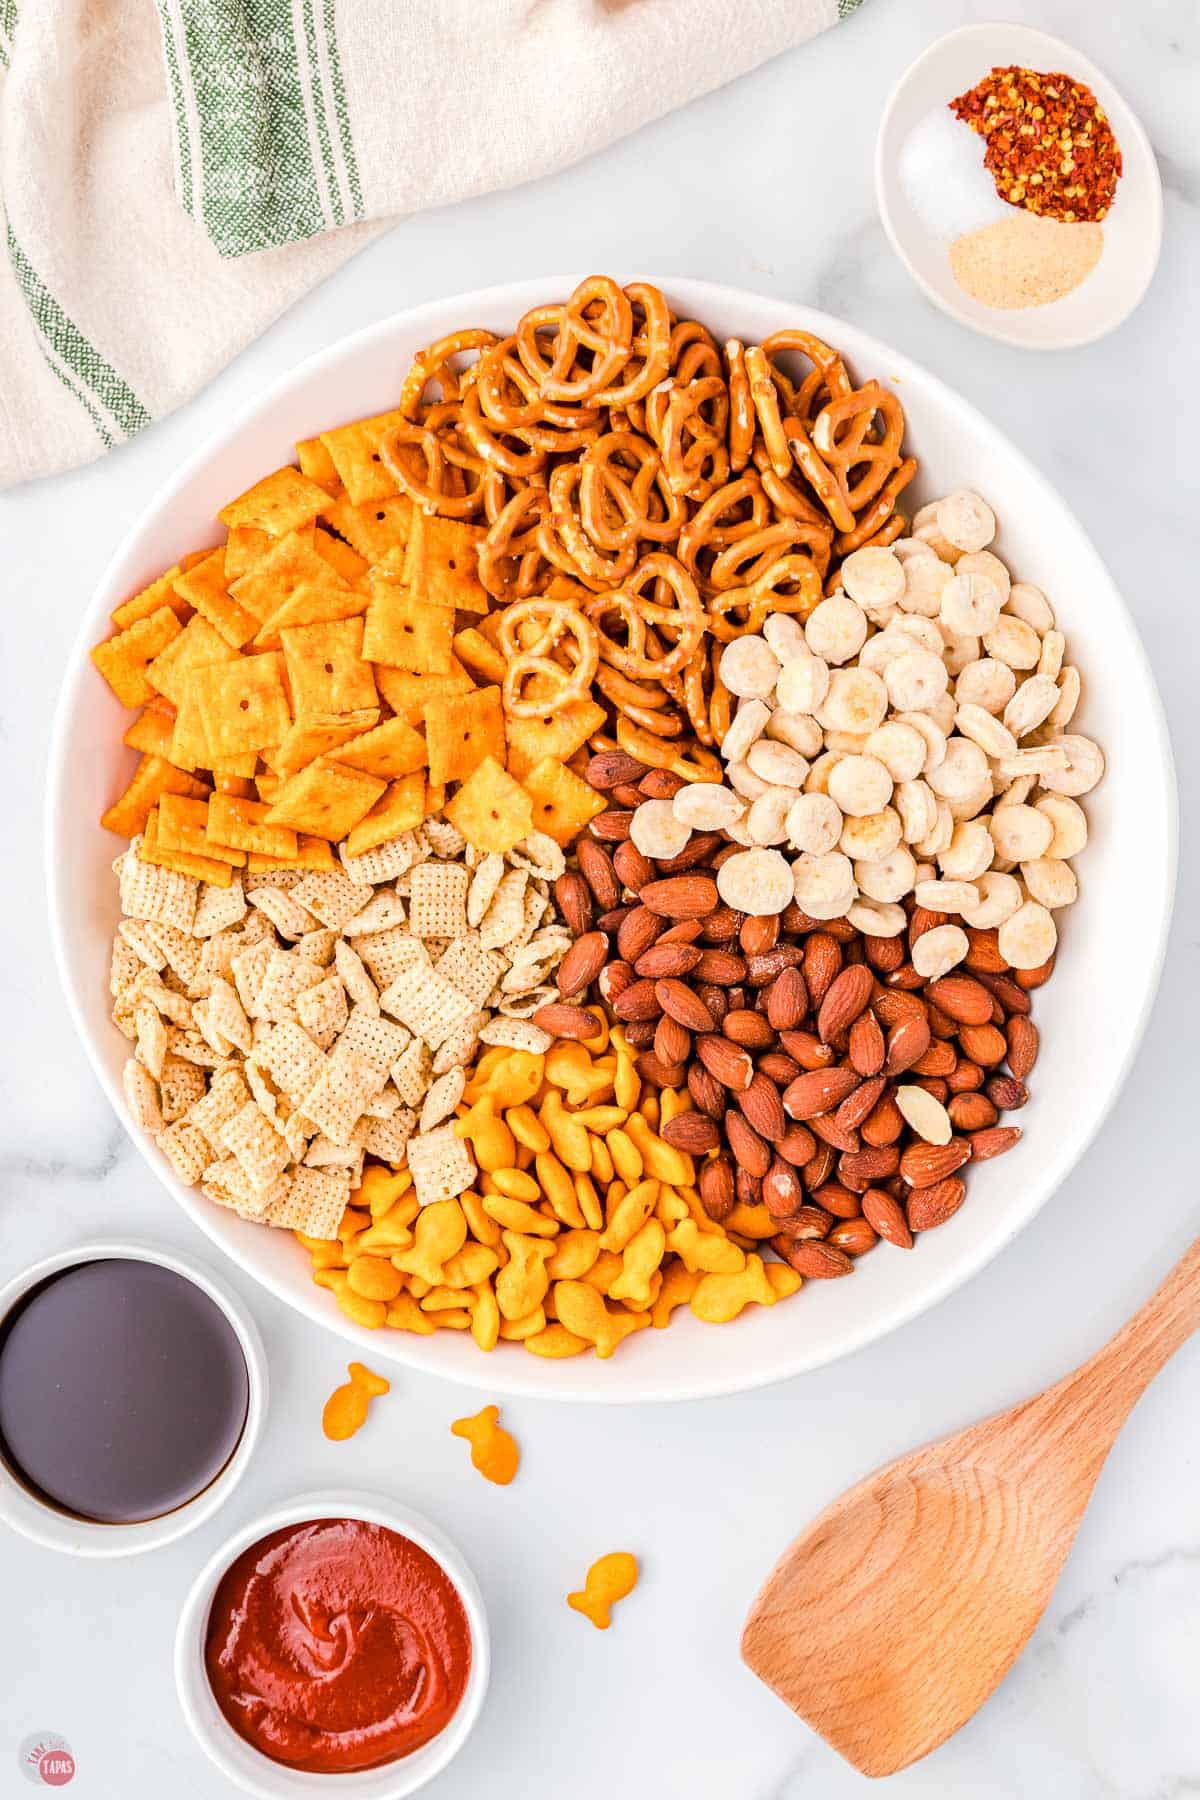 snack mix ingredients in a large microwavable bowl